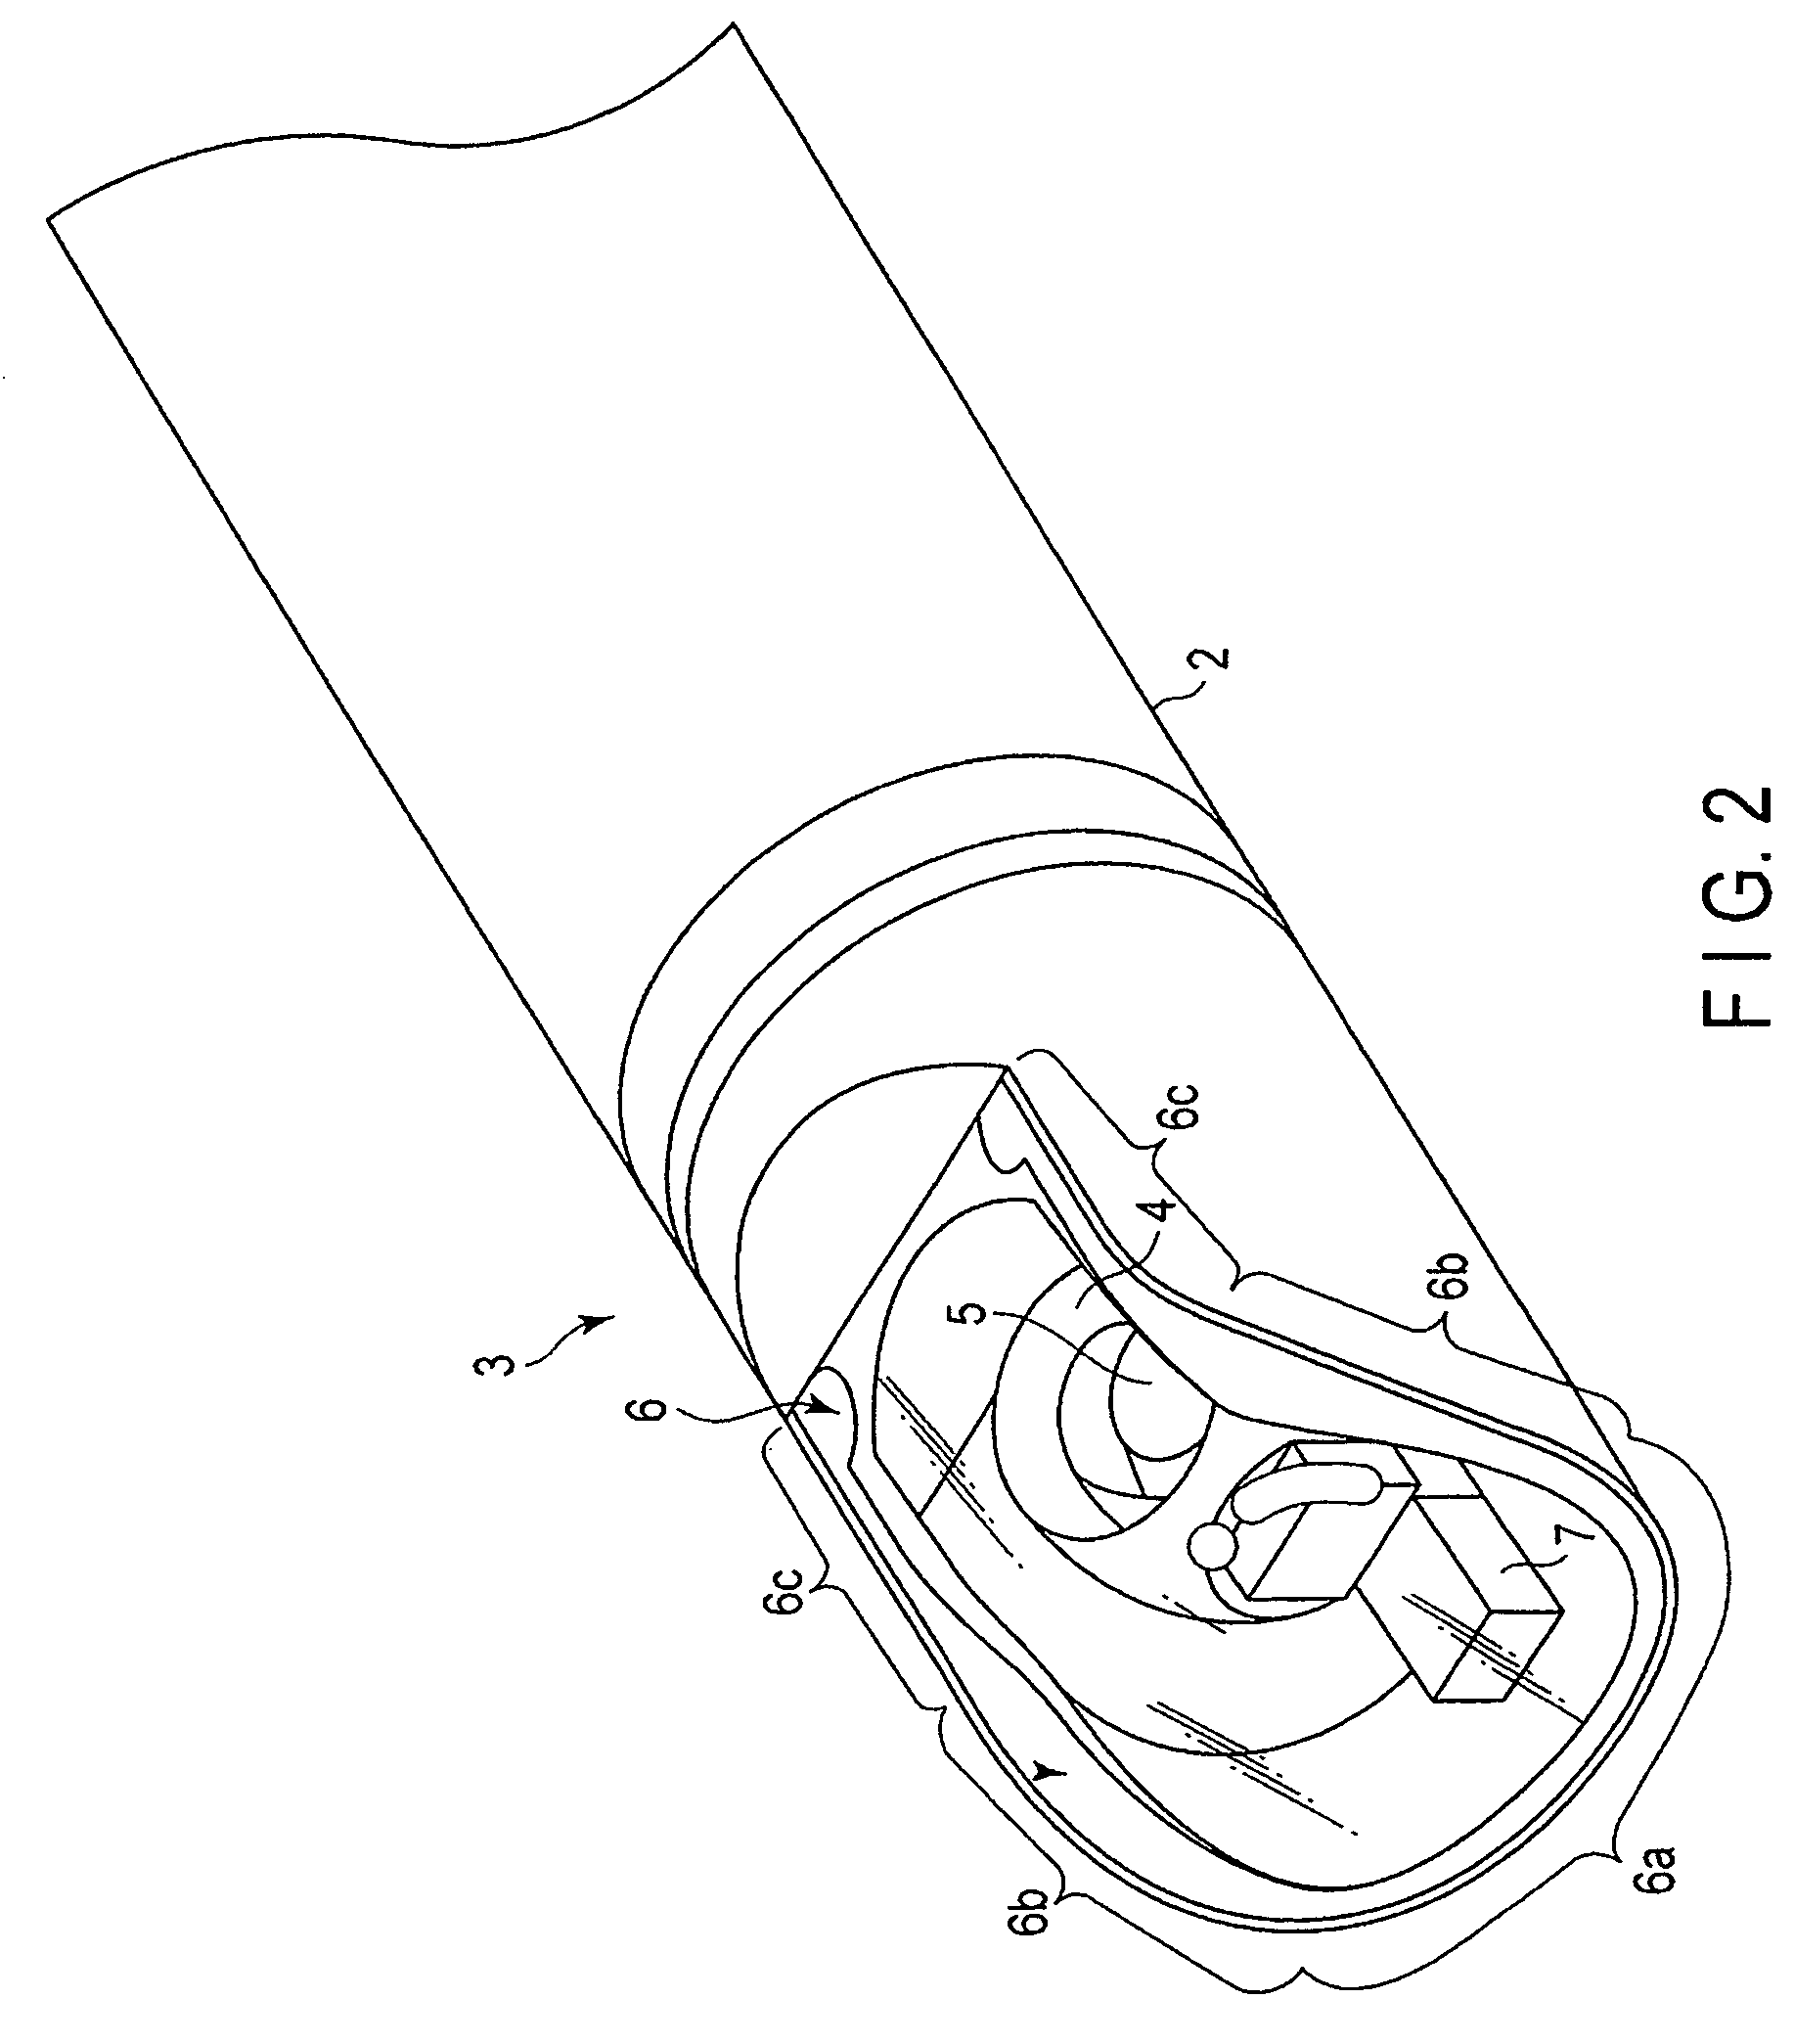 Medical device which acquires the picture for observation